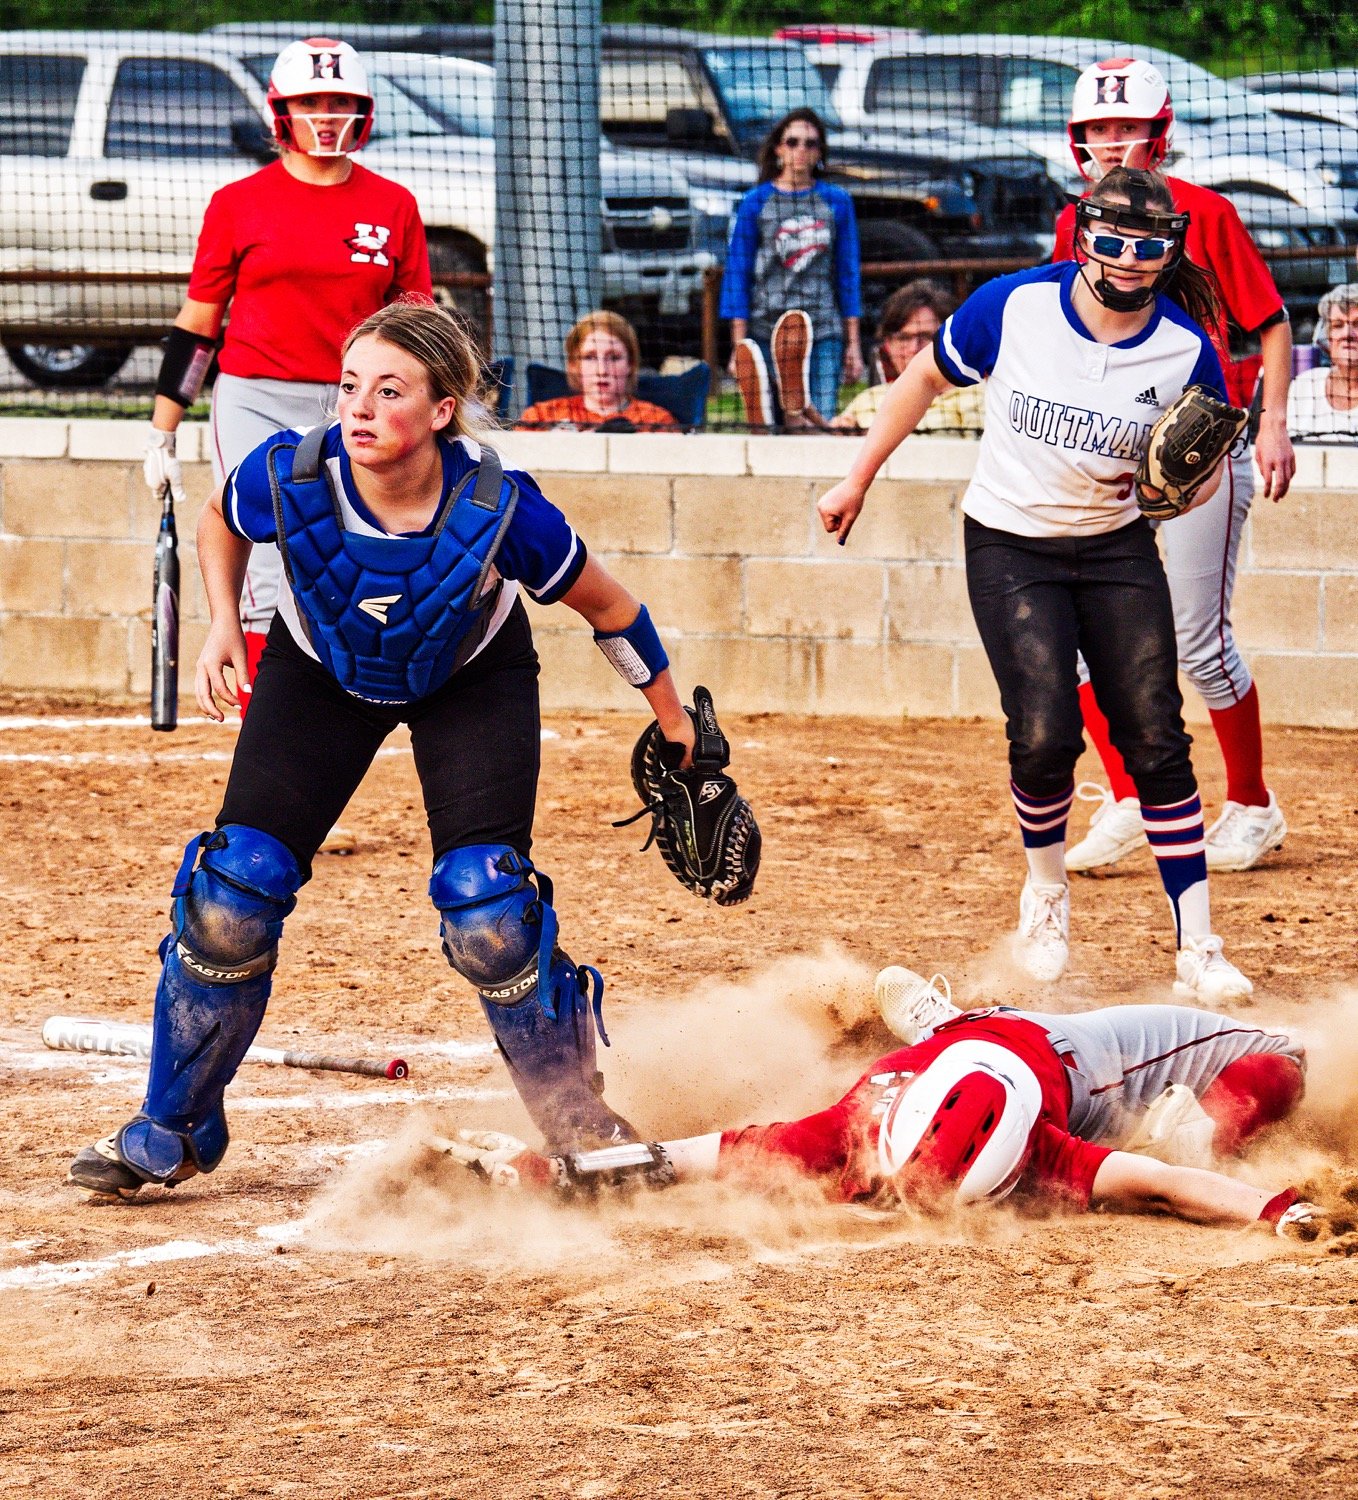 Senior catcher Kynlee Love won this battle at the plate, tagging out the Harmony base runner, as pitcher Alexis O'neal backs her up on the relay throw from senior Lindsey Hornaday. [see more senior night action]